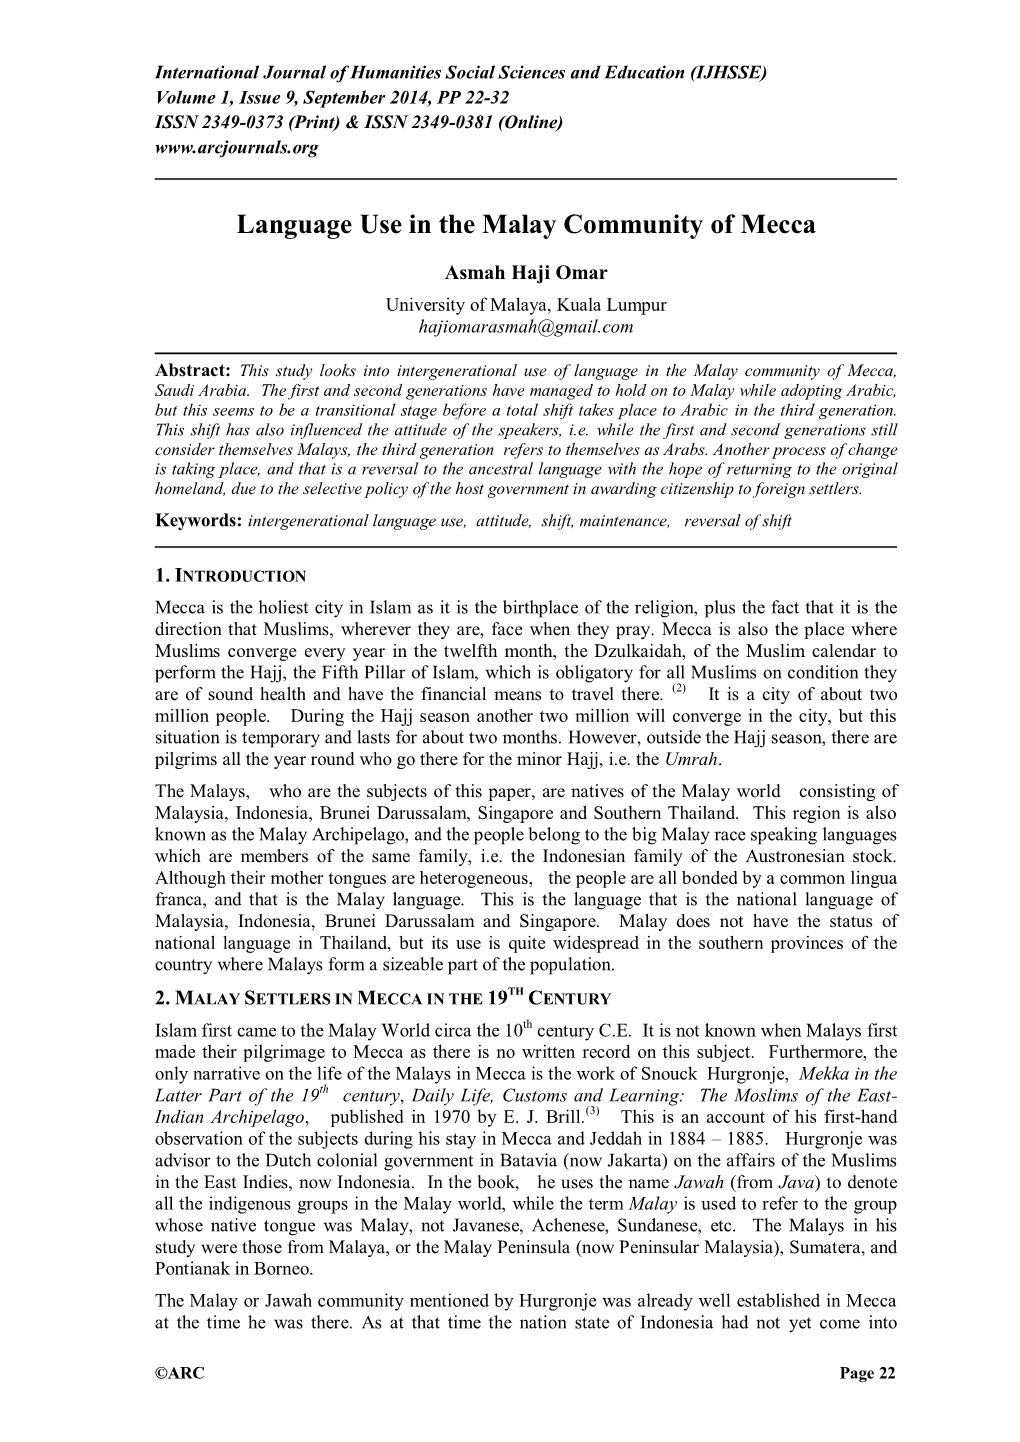 Language Use in the Malay Community of Mecca